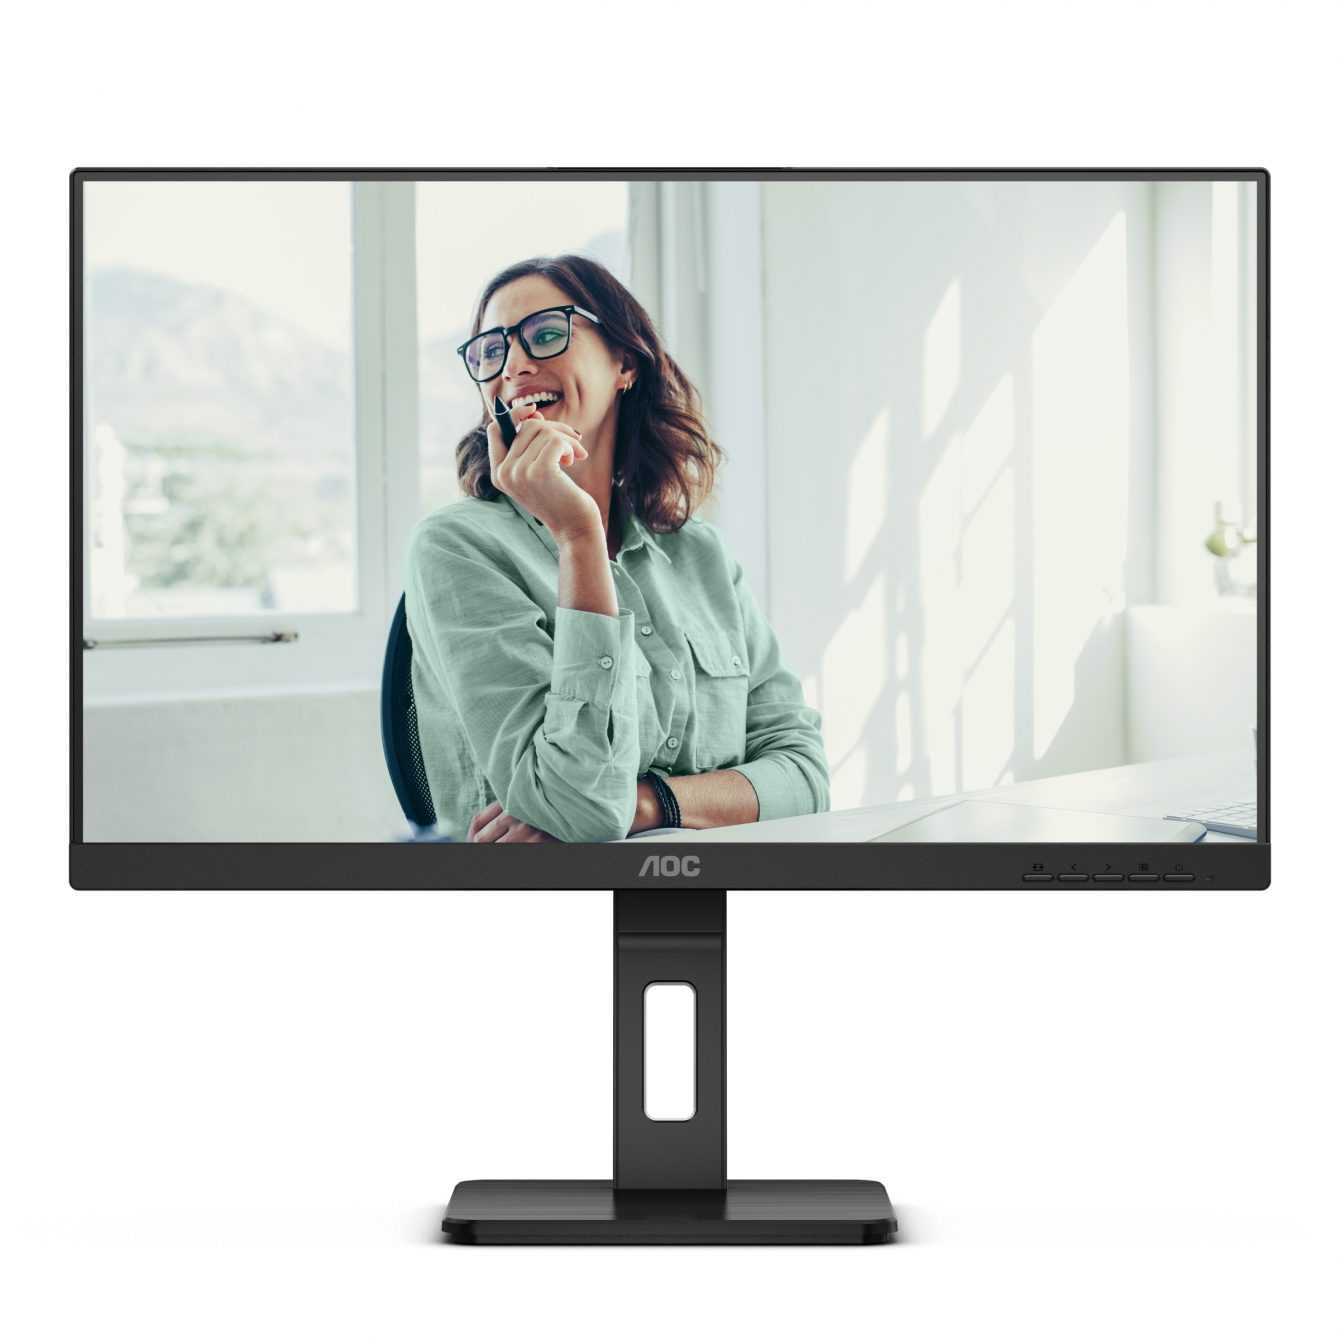 AOC P3: here is the new line of professional monitors with USB-C docking